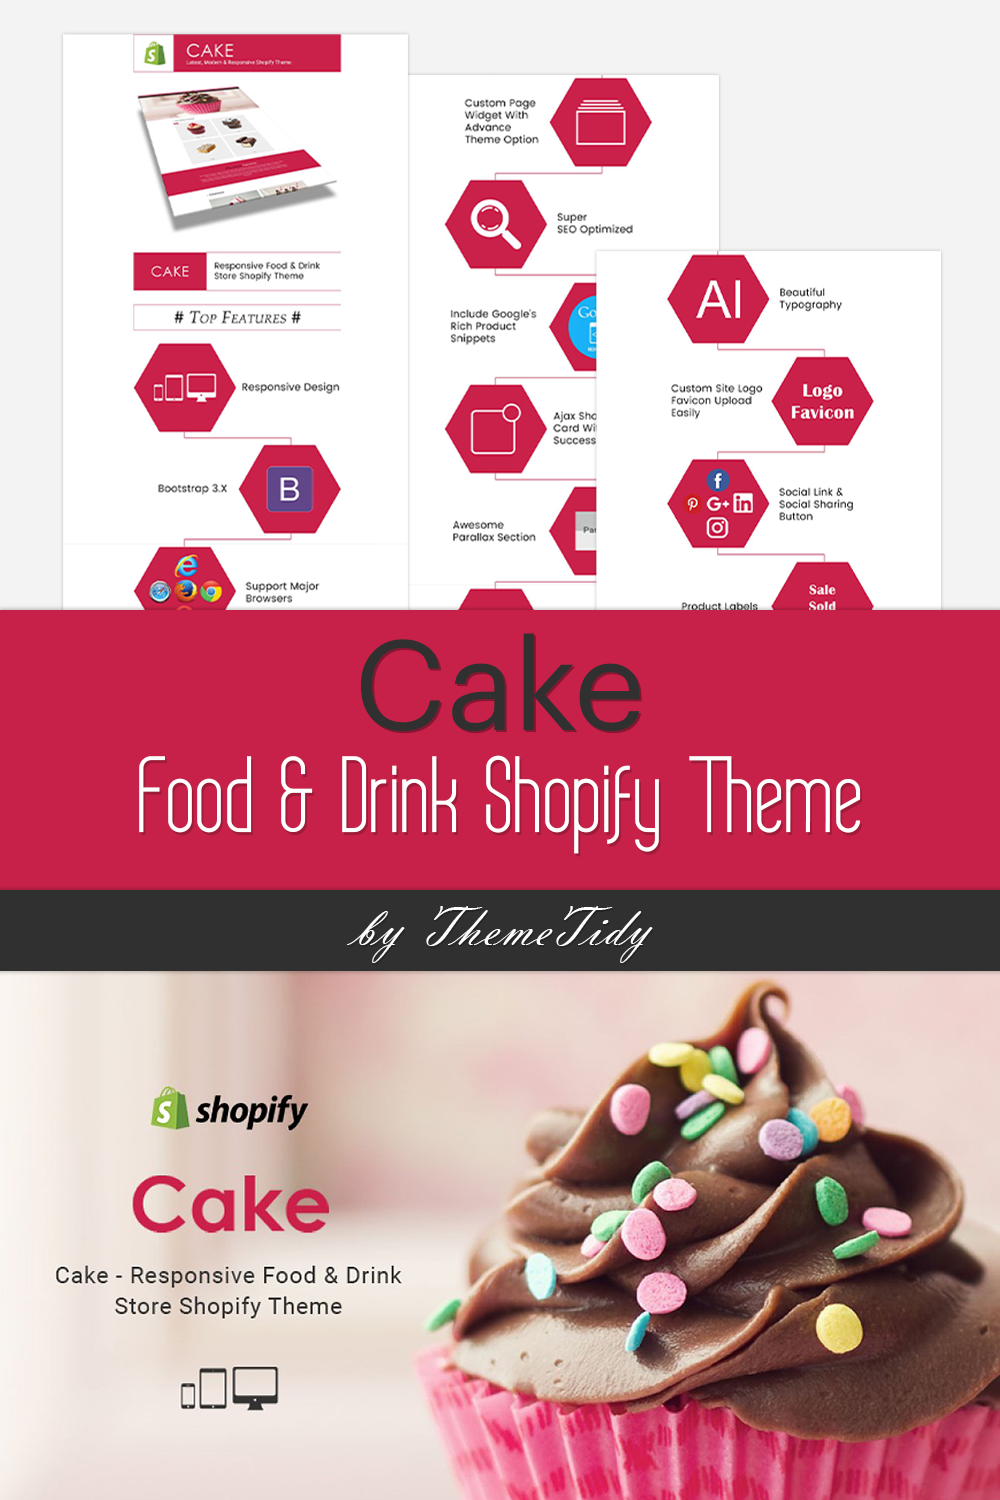 Cake – food drink shopify theme images of pinterest.